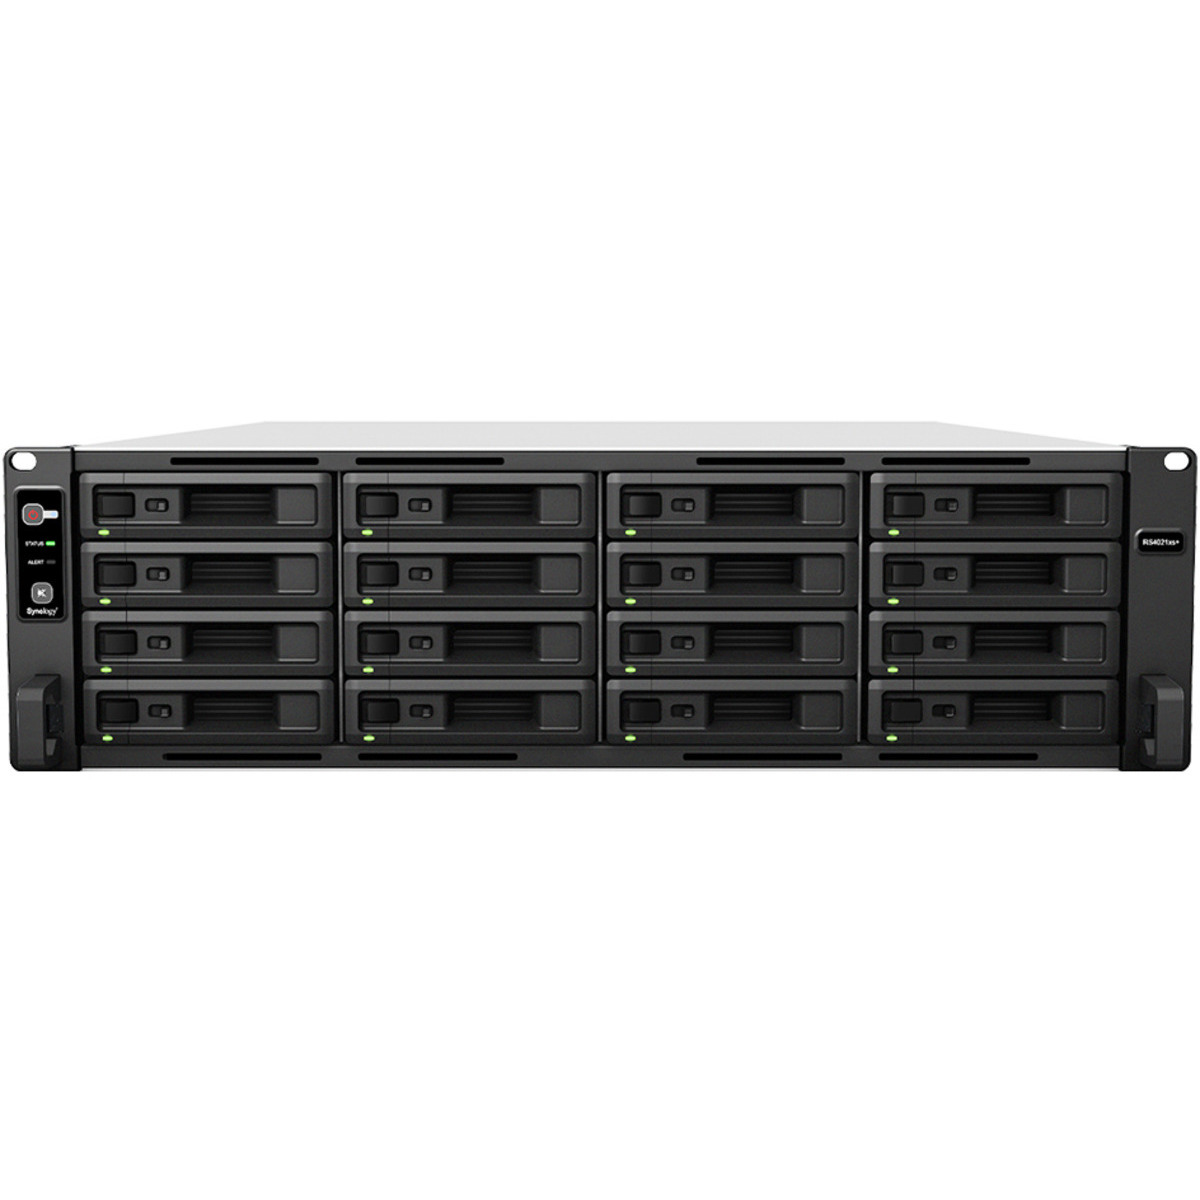 Synology RackStation RS4021xs+ 120tb 16-Bay RackMount Large Business / Enterprise NAS - Network Attached Storage Device 10x12tb Western Digital Red Pro WD121KFBX 3.5 7200rpm SATA 6Gb/s HDD NAS Class Drives Installed - Burn-In Tested RackStation RS4021xs+